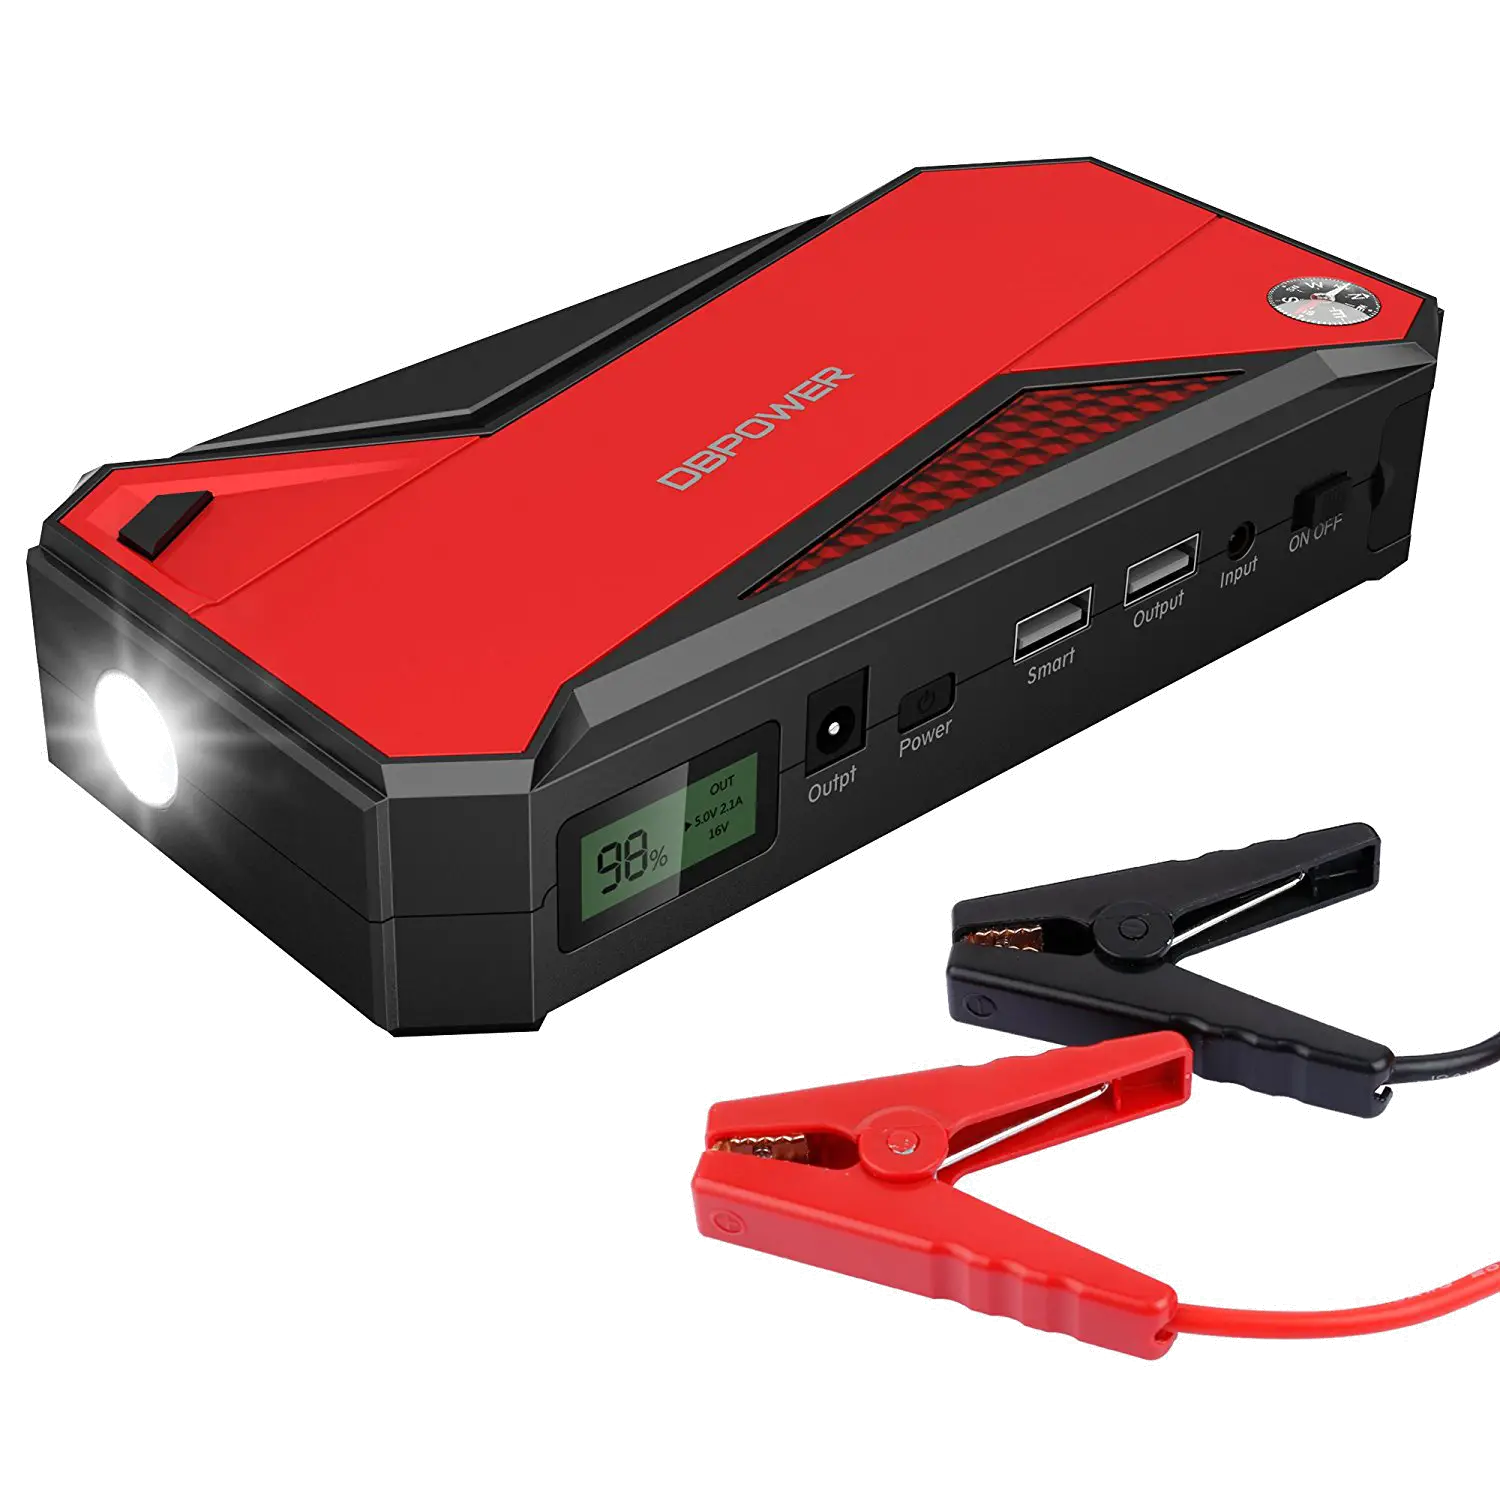 Top 8 Lithium Ion Jump Starters Reviewed | Best Portable Boost for Cars